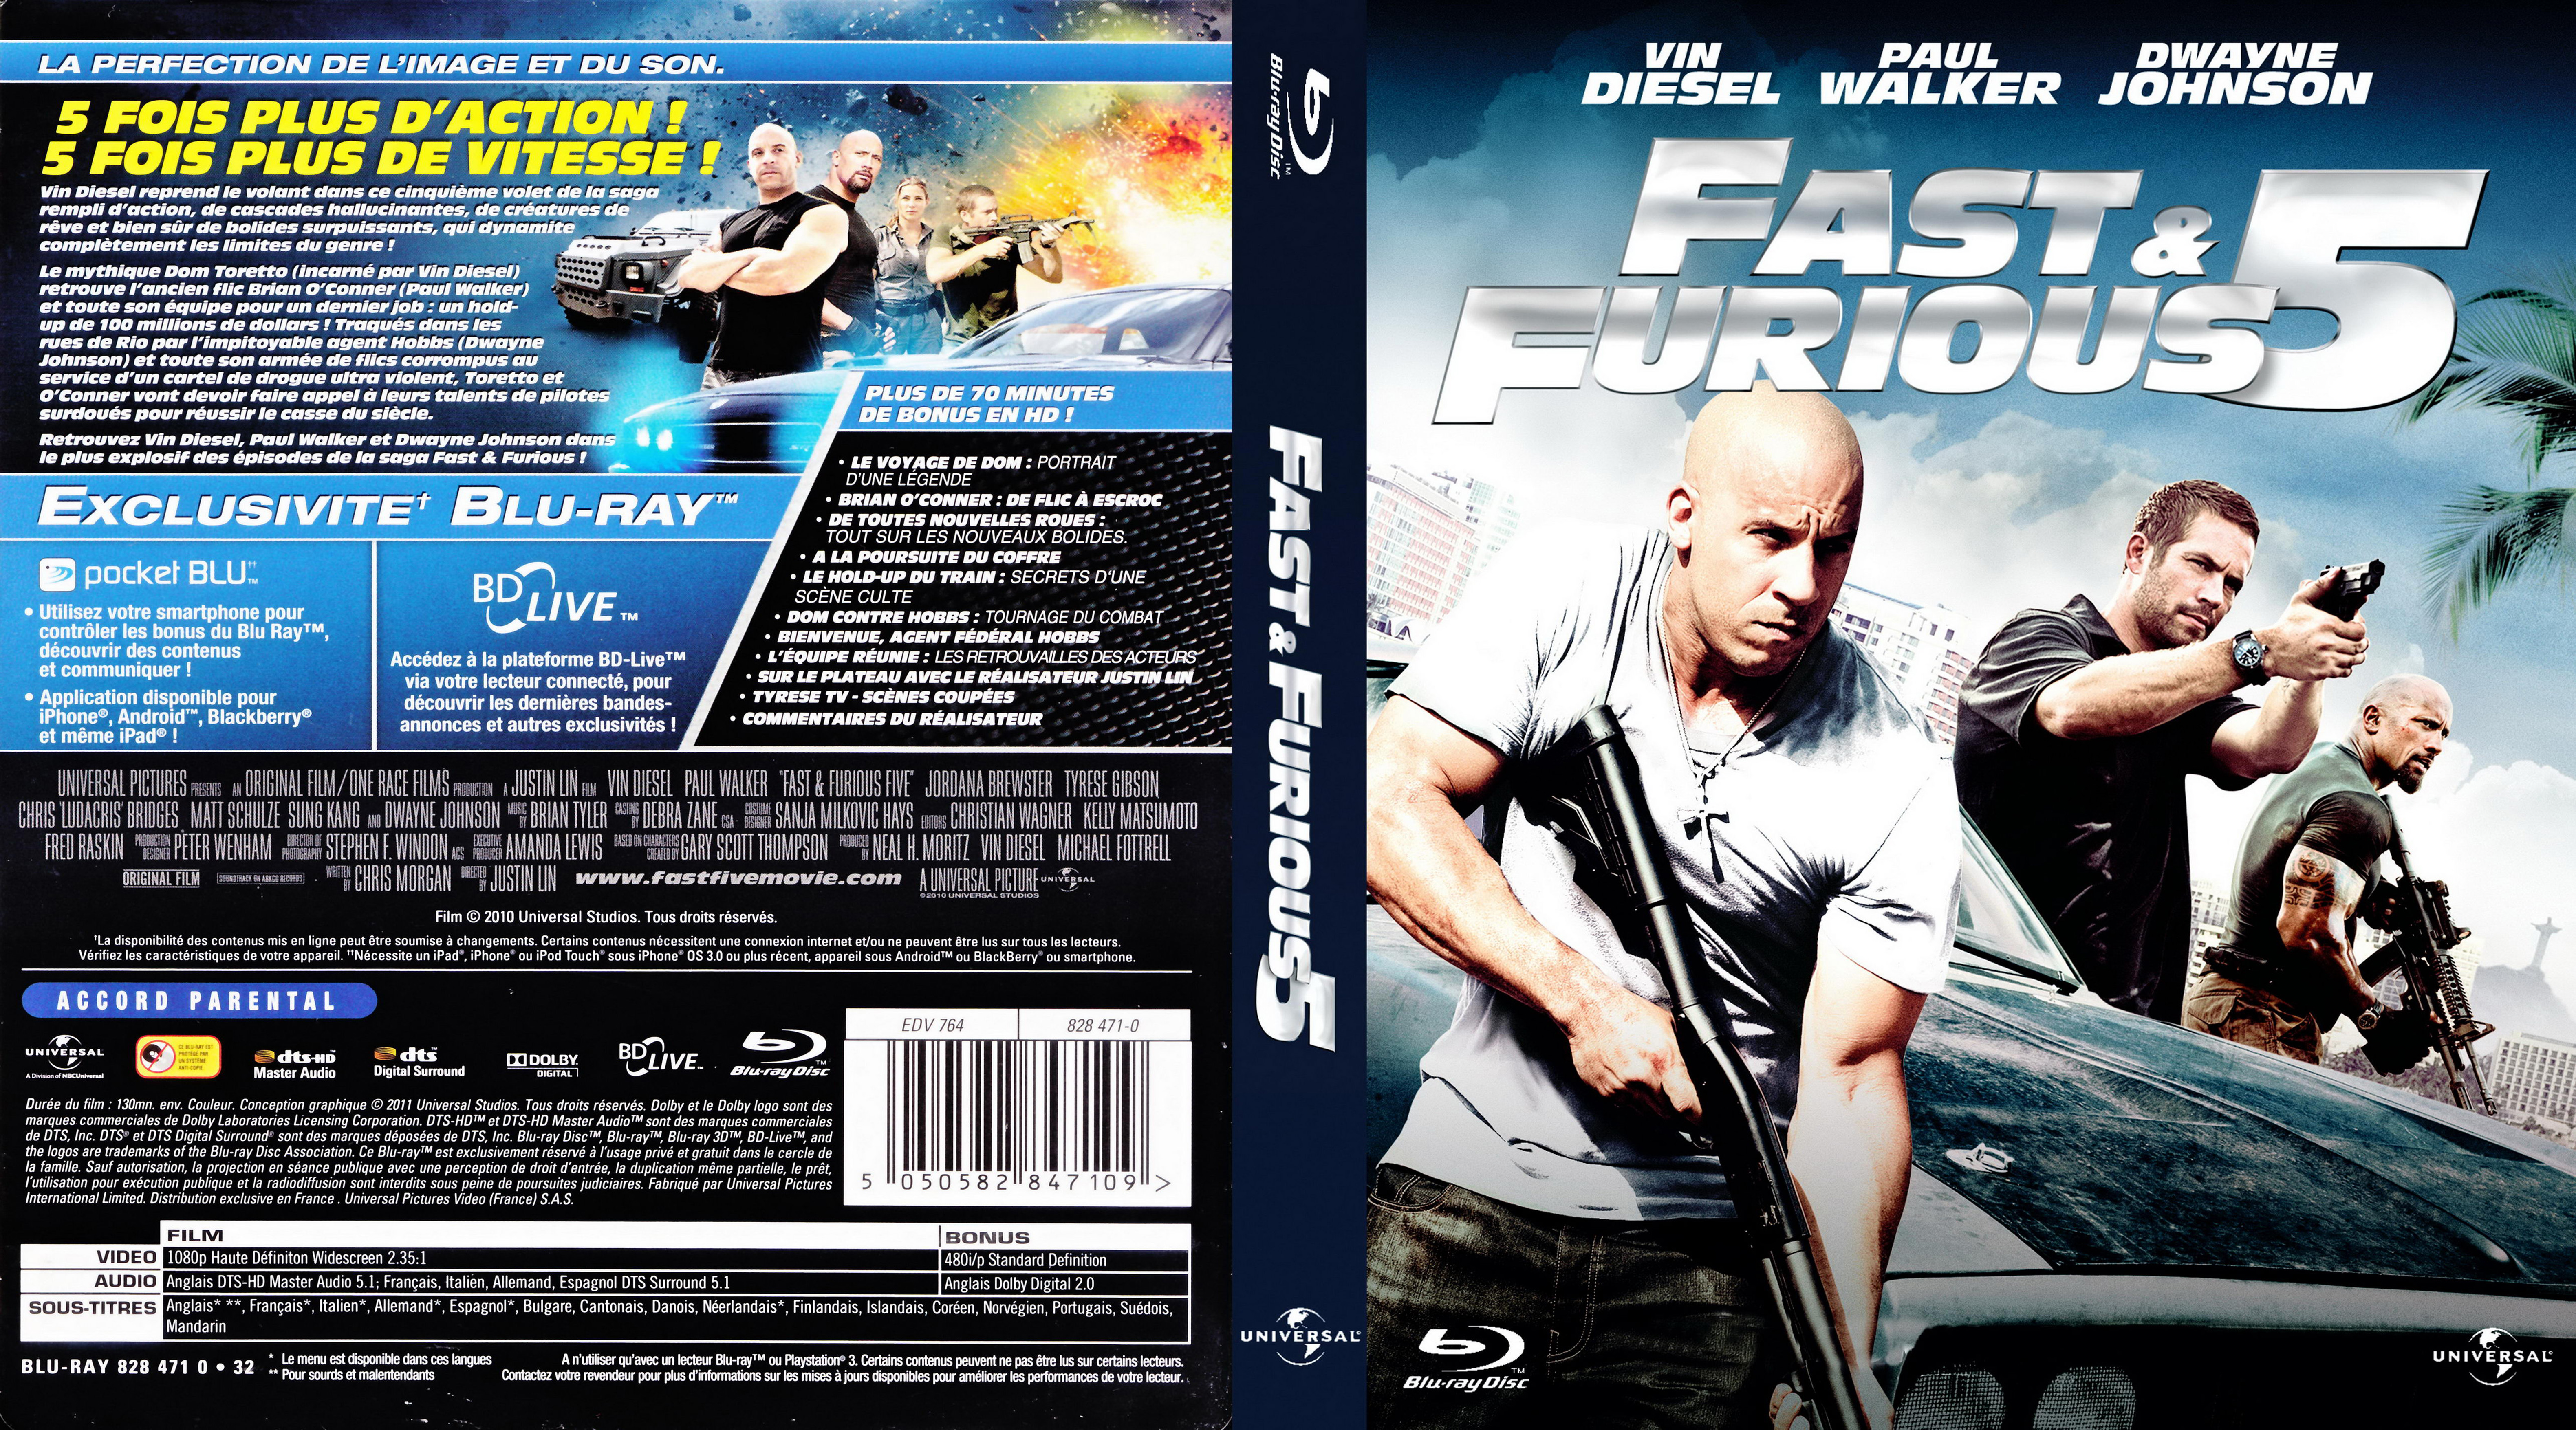 Jaquette DVD Fast and furious 5 (BLU-RAY)